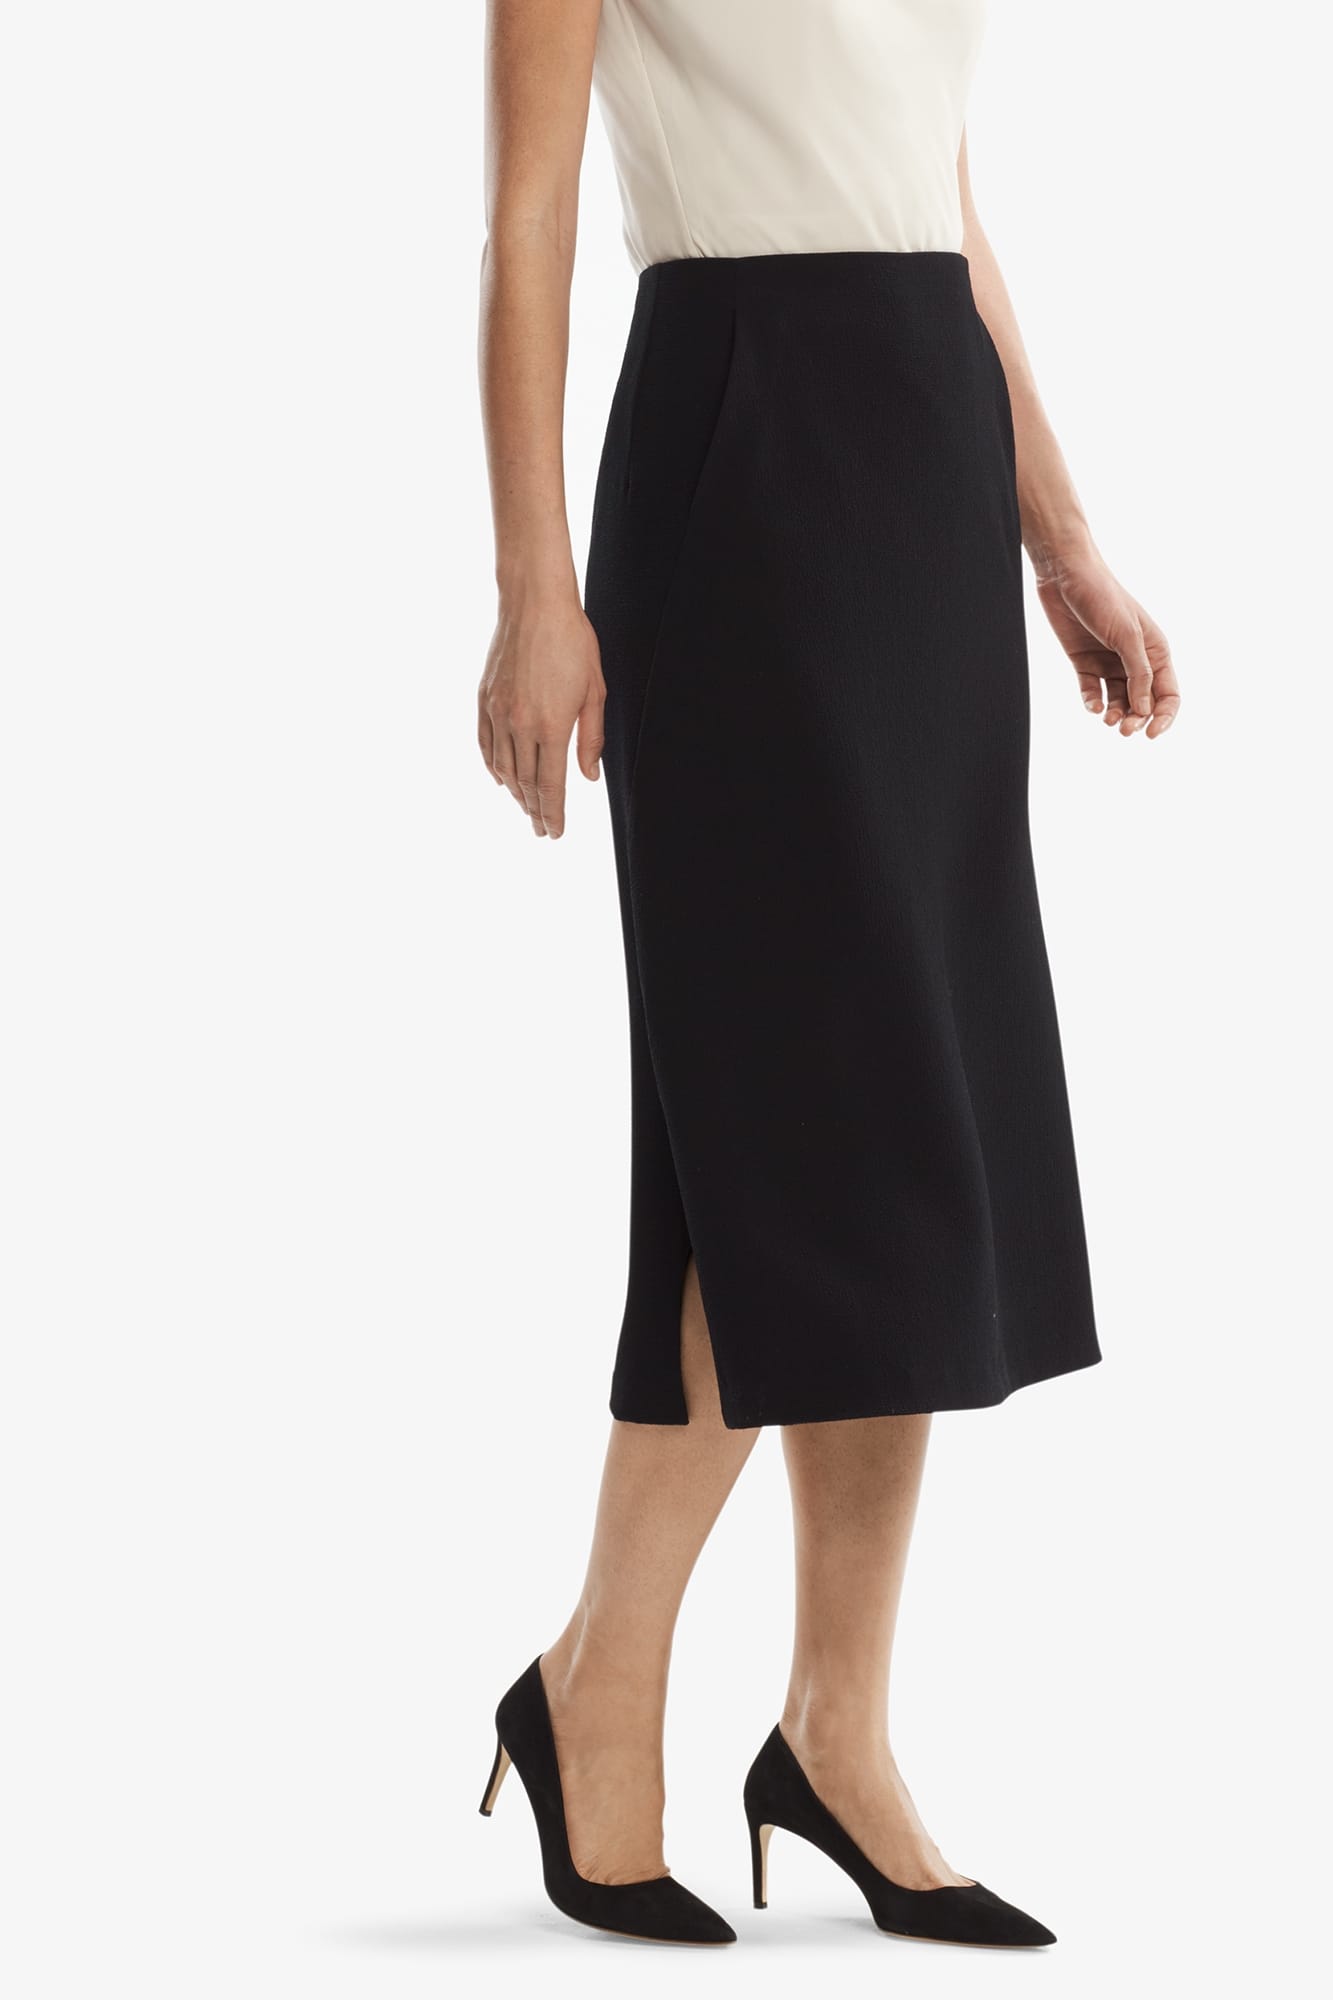 Willoughby Skirt Staccato - Black | M.M.LaFleur